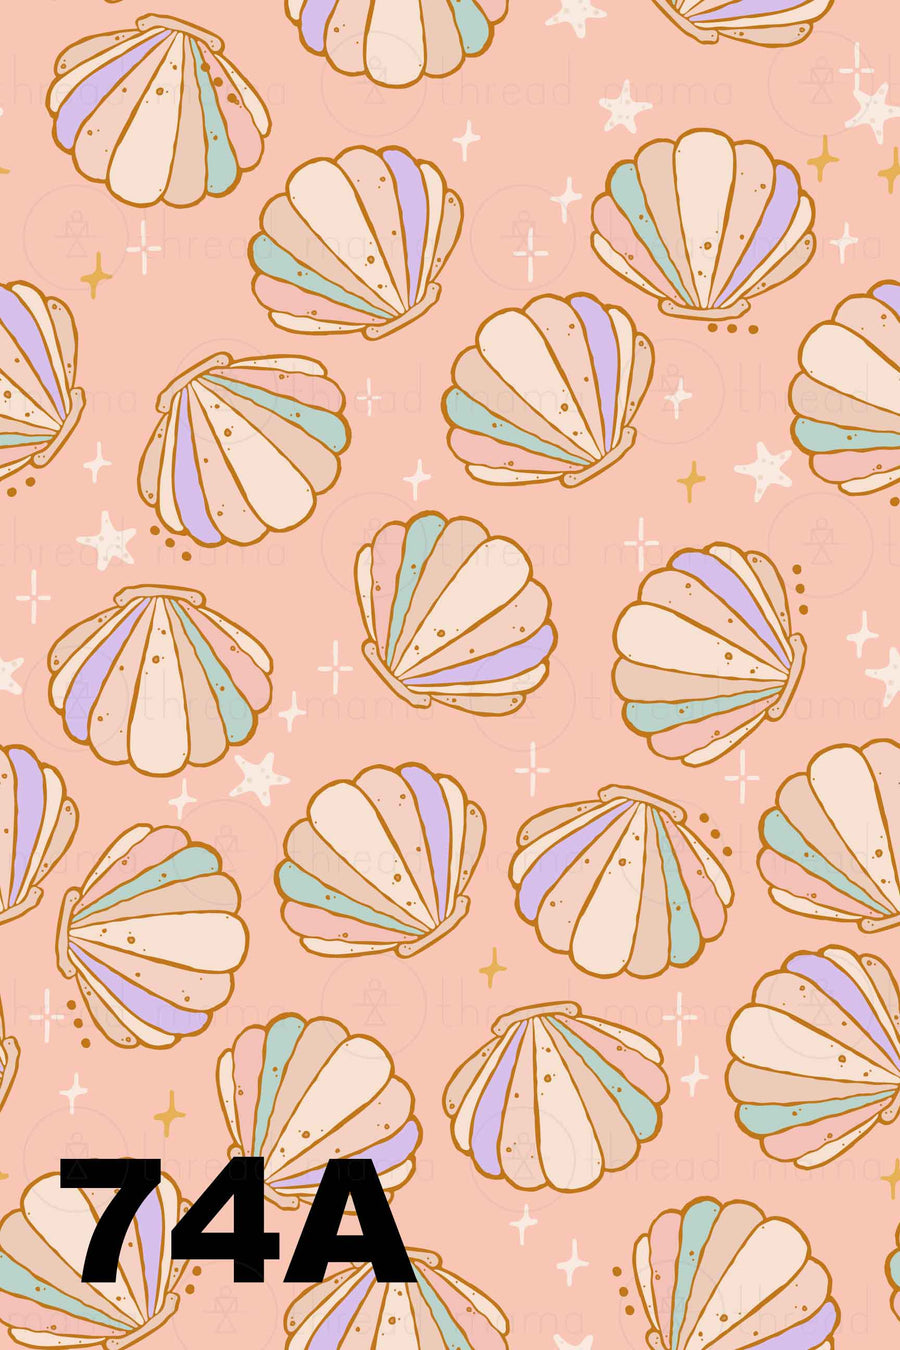 Background Pattern #74 Collection (Printable Poster)